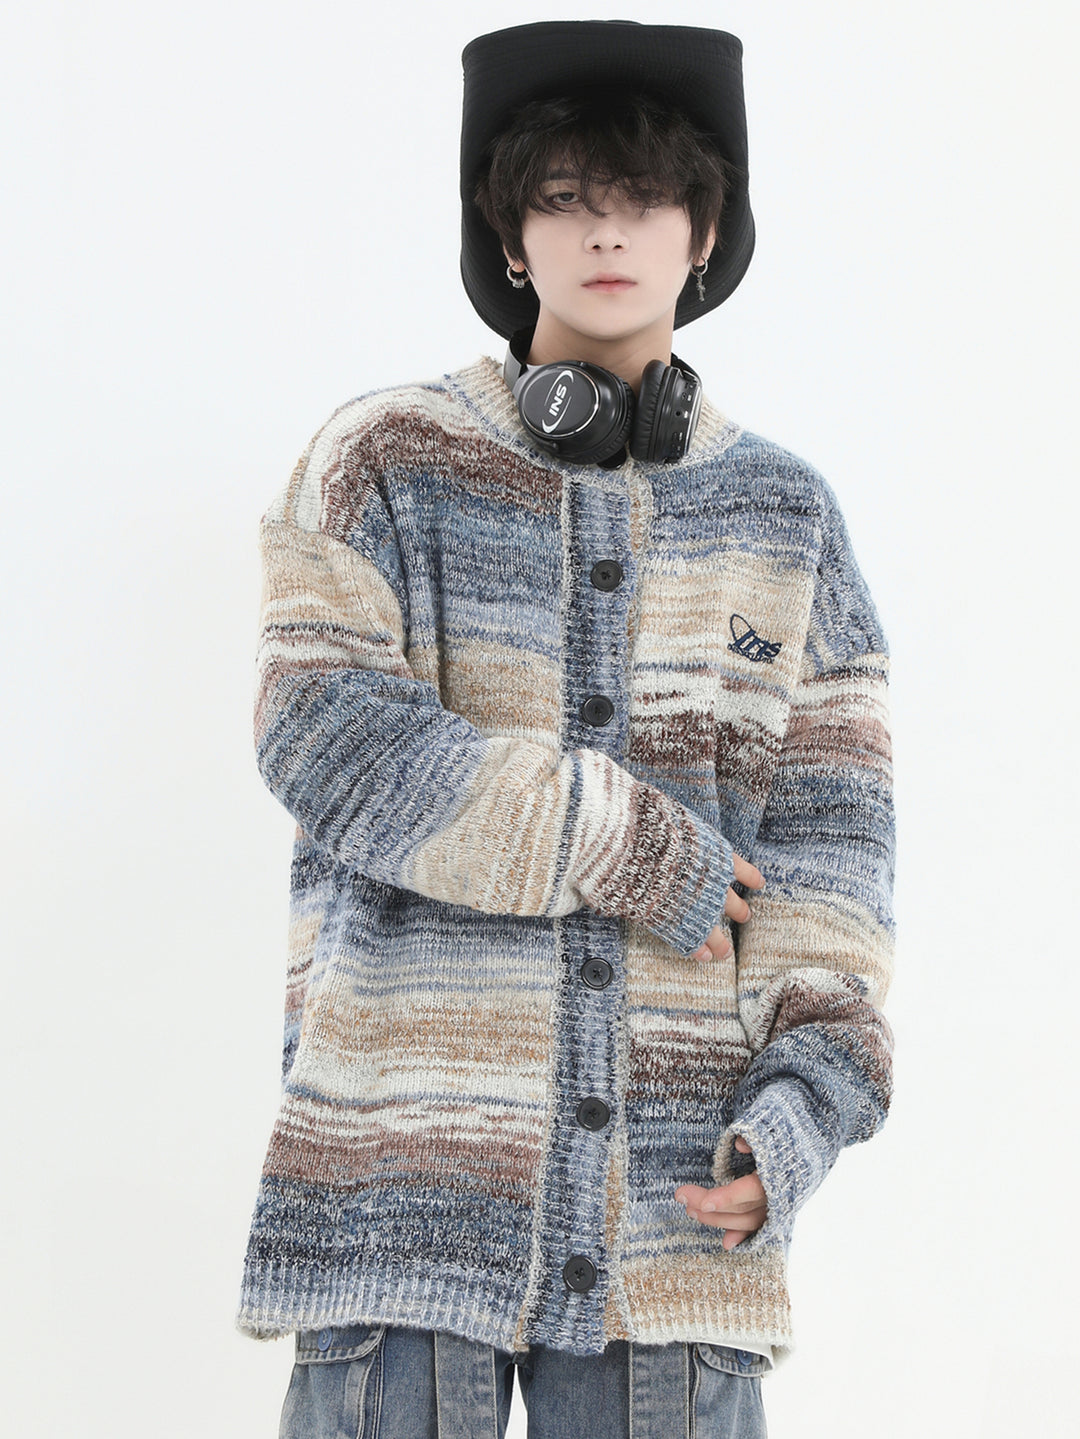 [INSstudios] painting color loose knit sweater na821